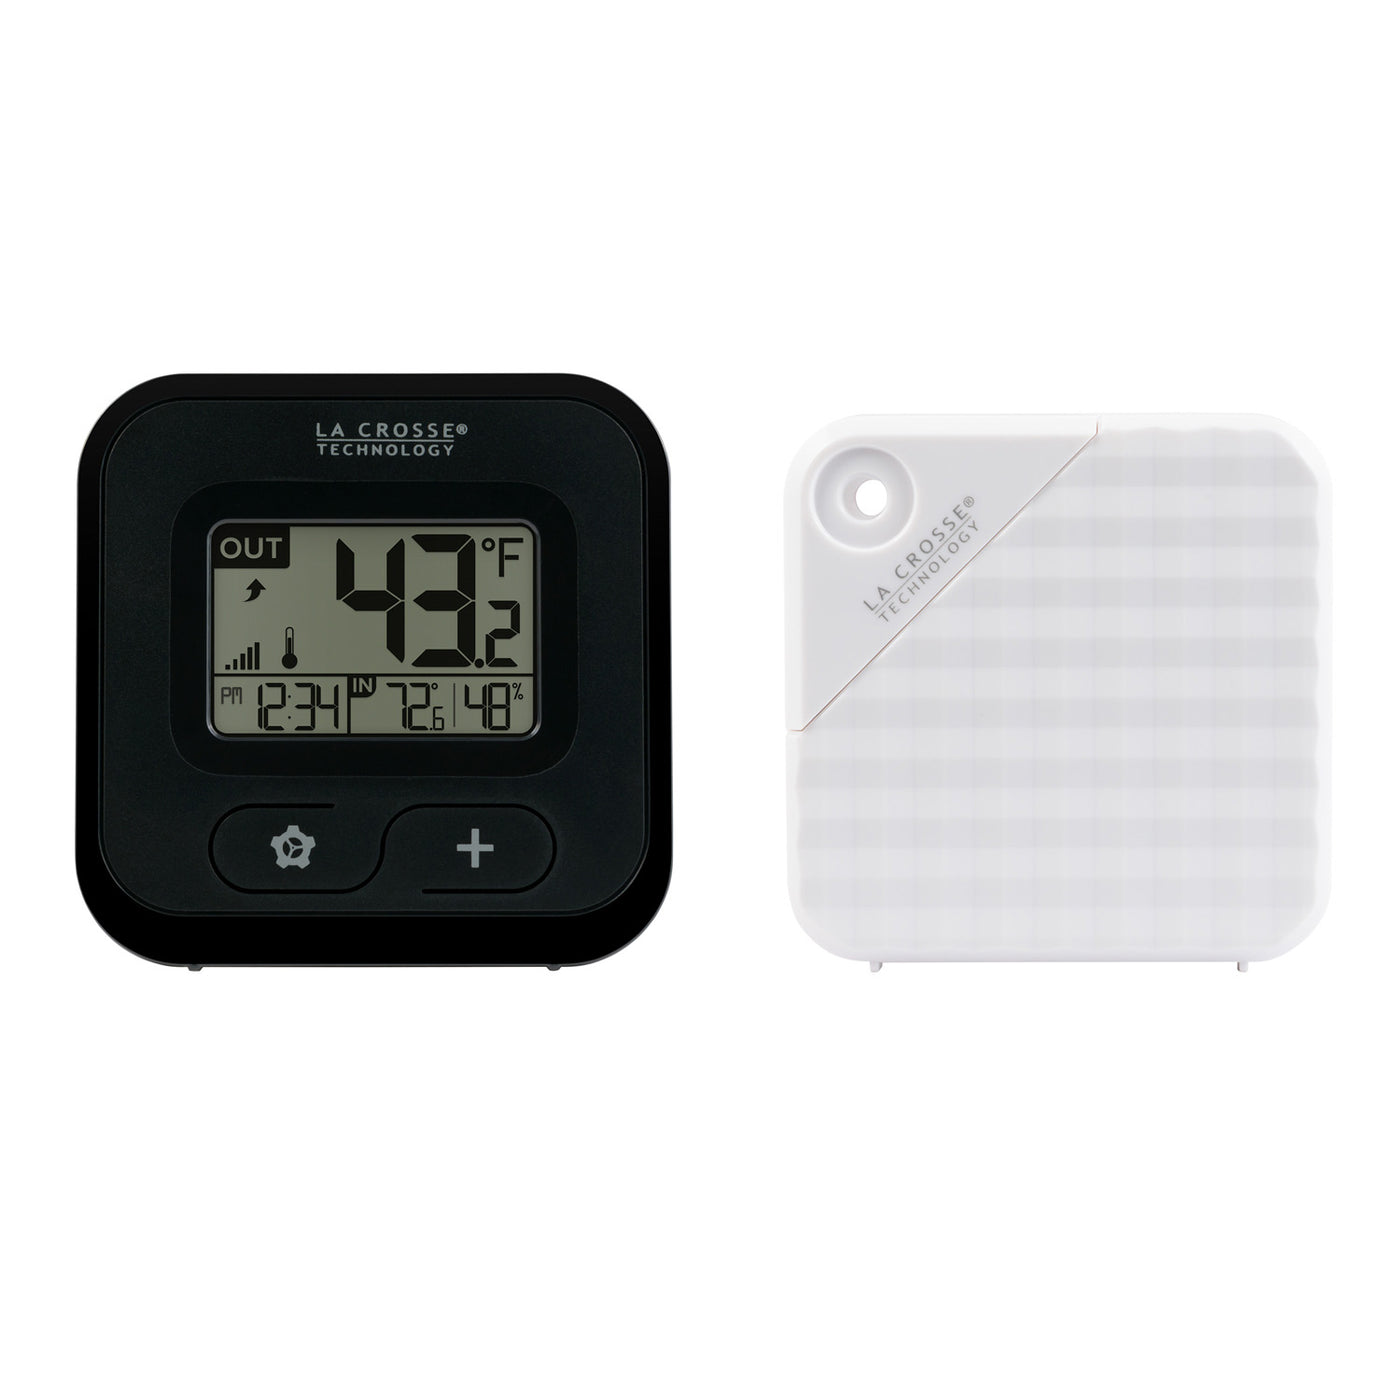 308-147 Wireless Thermometer